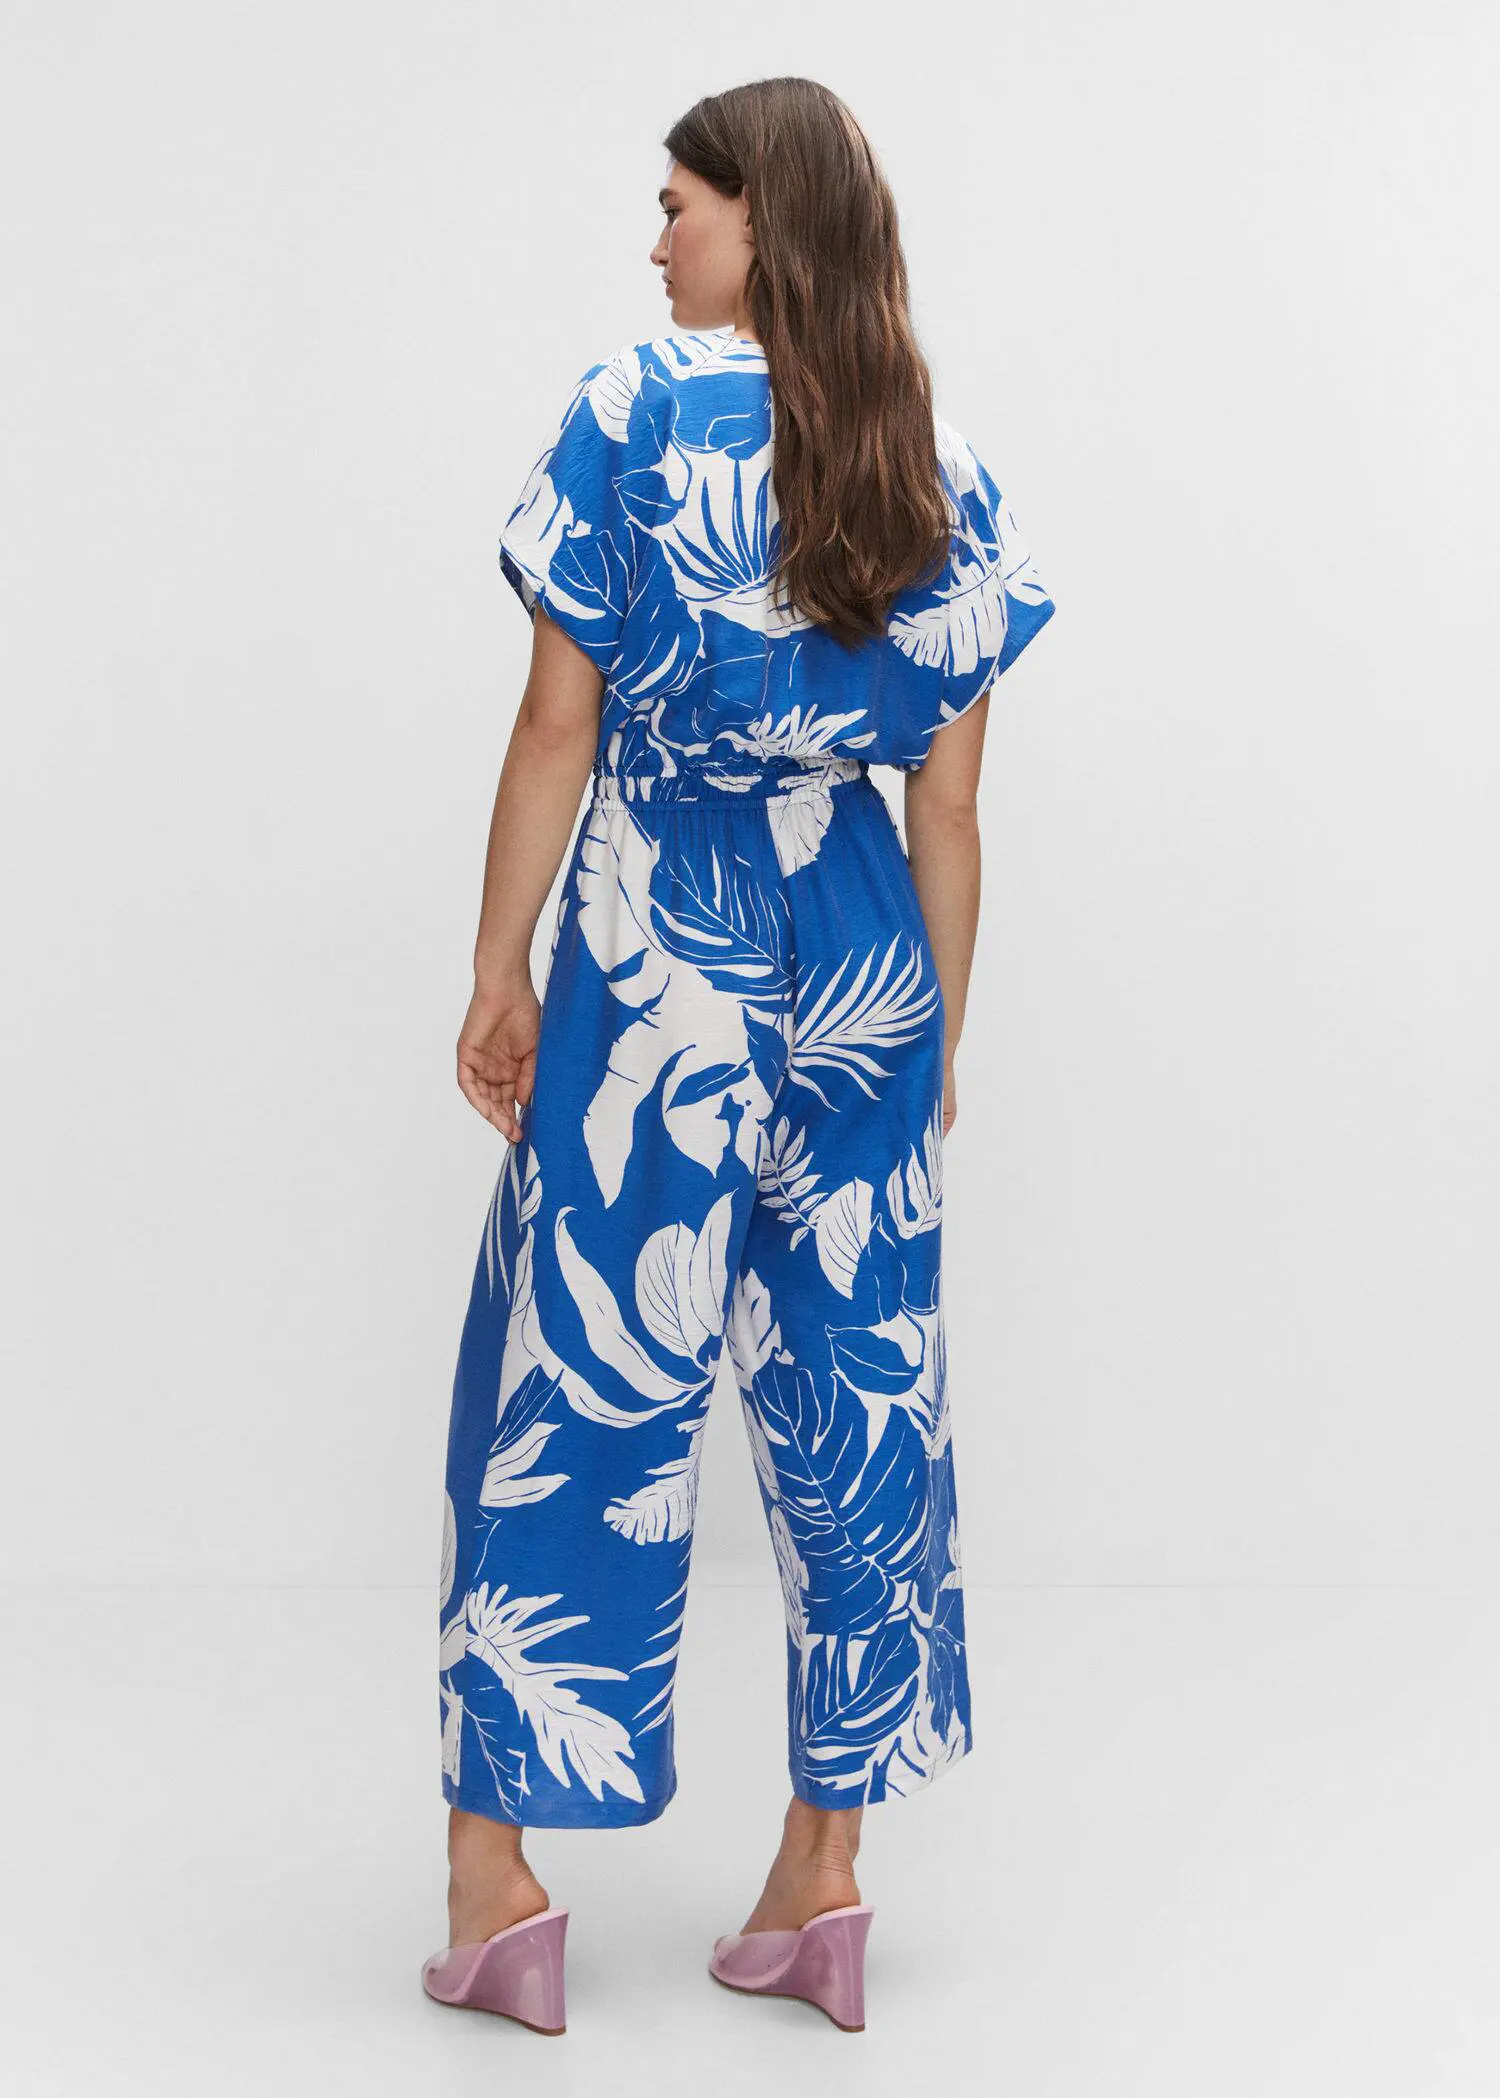 Mango Tropical print jumpsuit. a woman wearing a blue and white floral jumpsuit. 